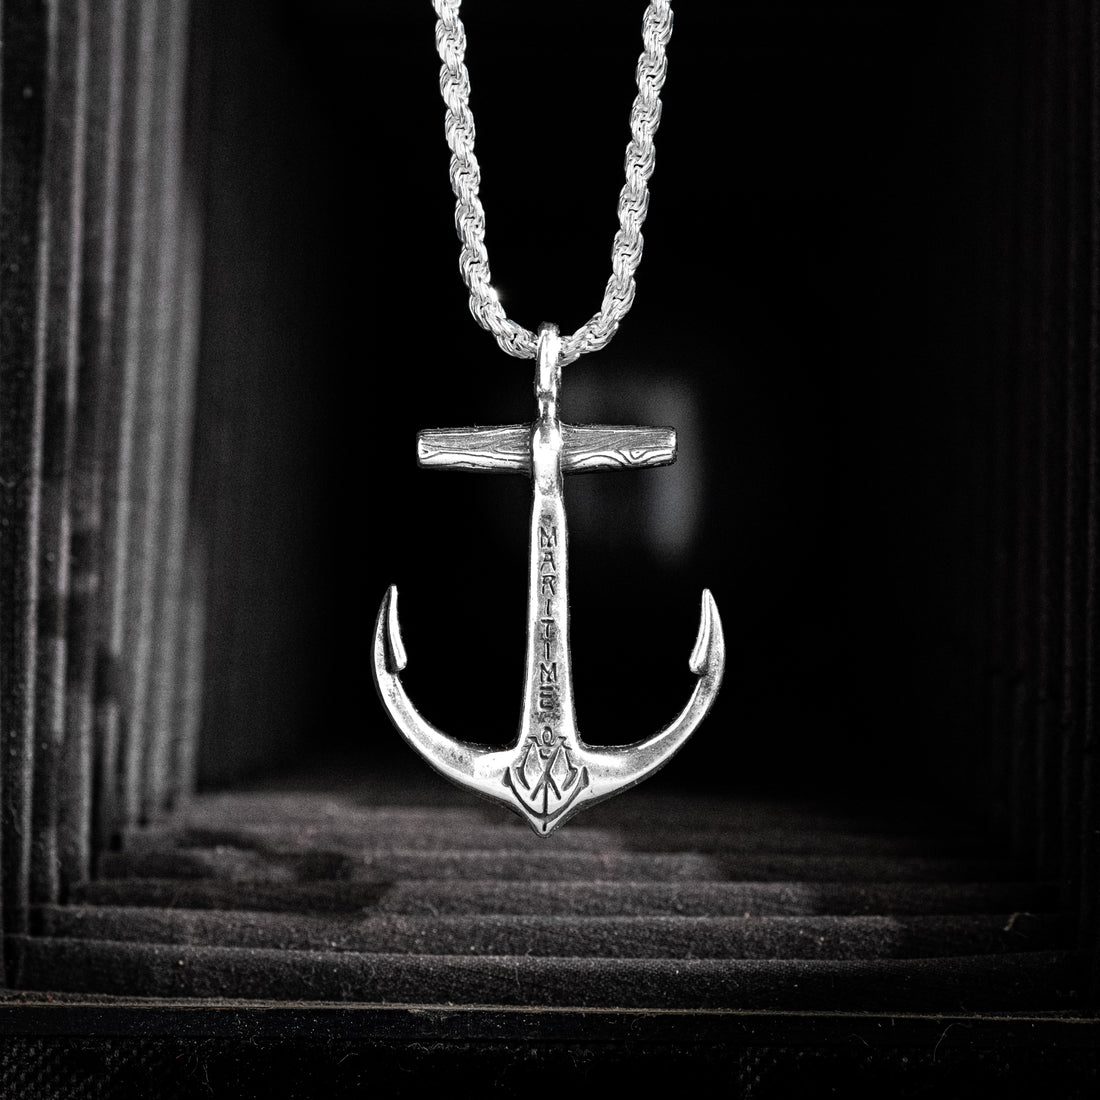 Buy 925 Sterling Silver Anchor Pendant for Men and Boys